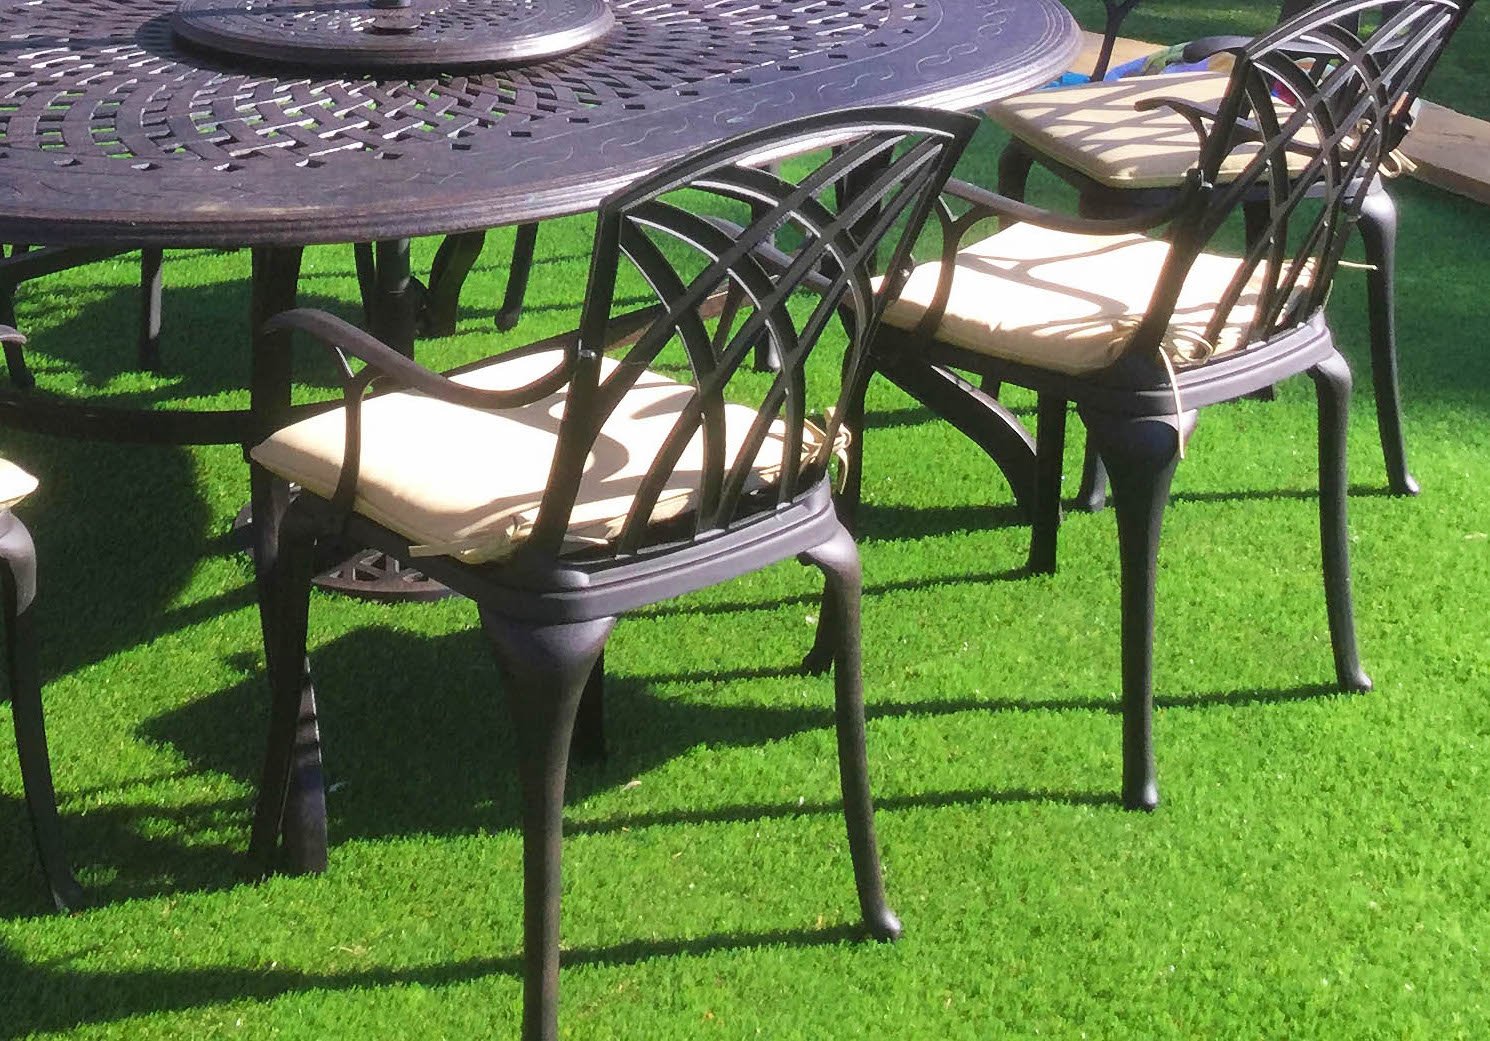 What is the best type of garden furniture to put on artificial grass?